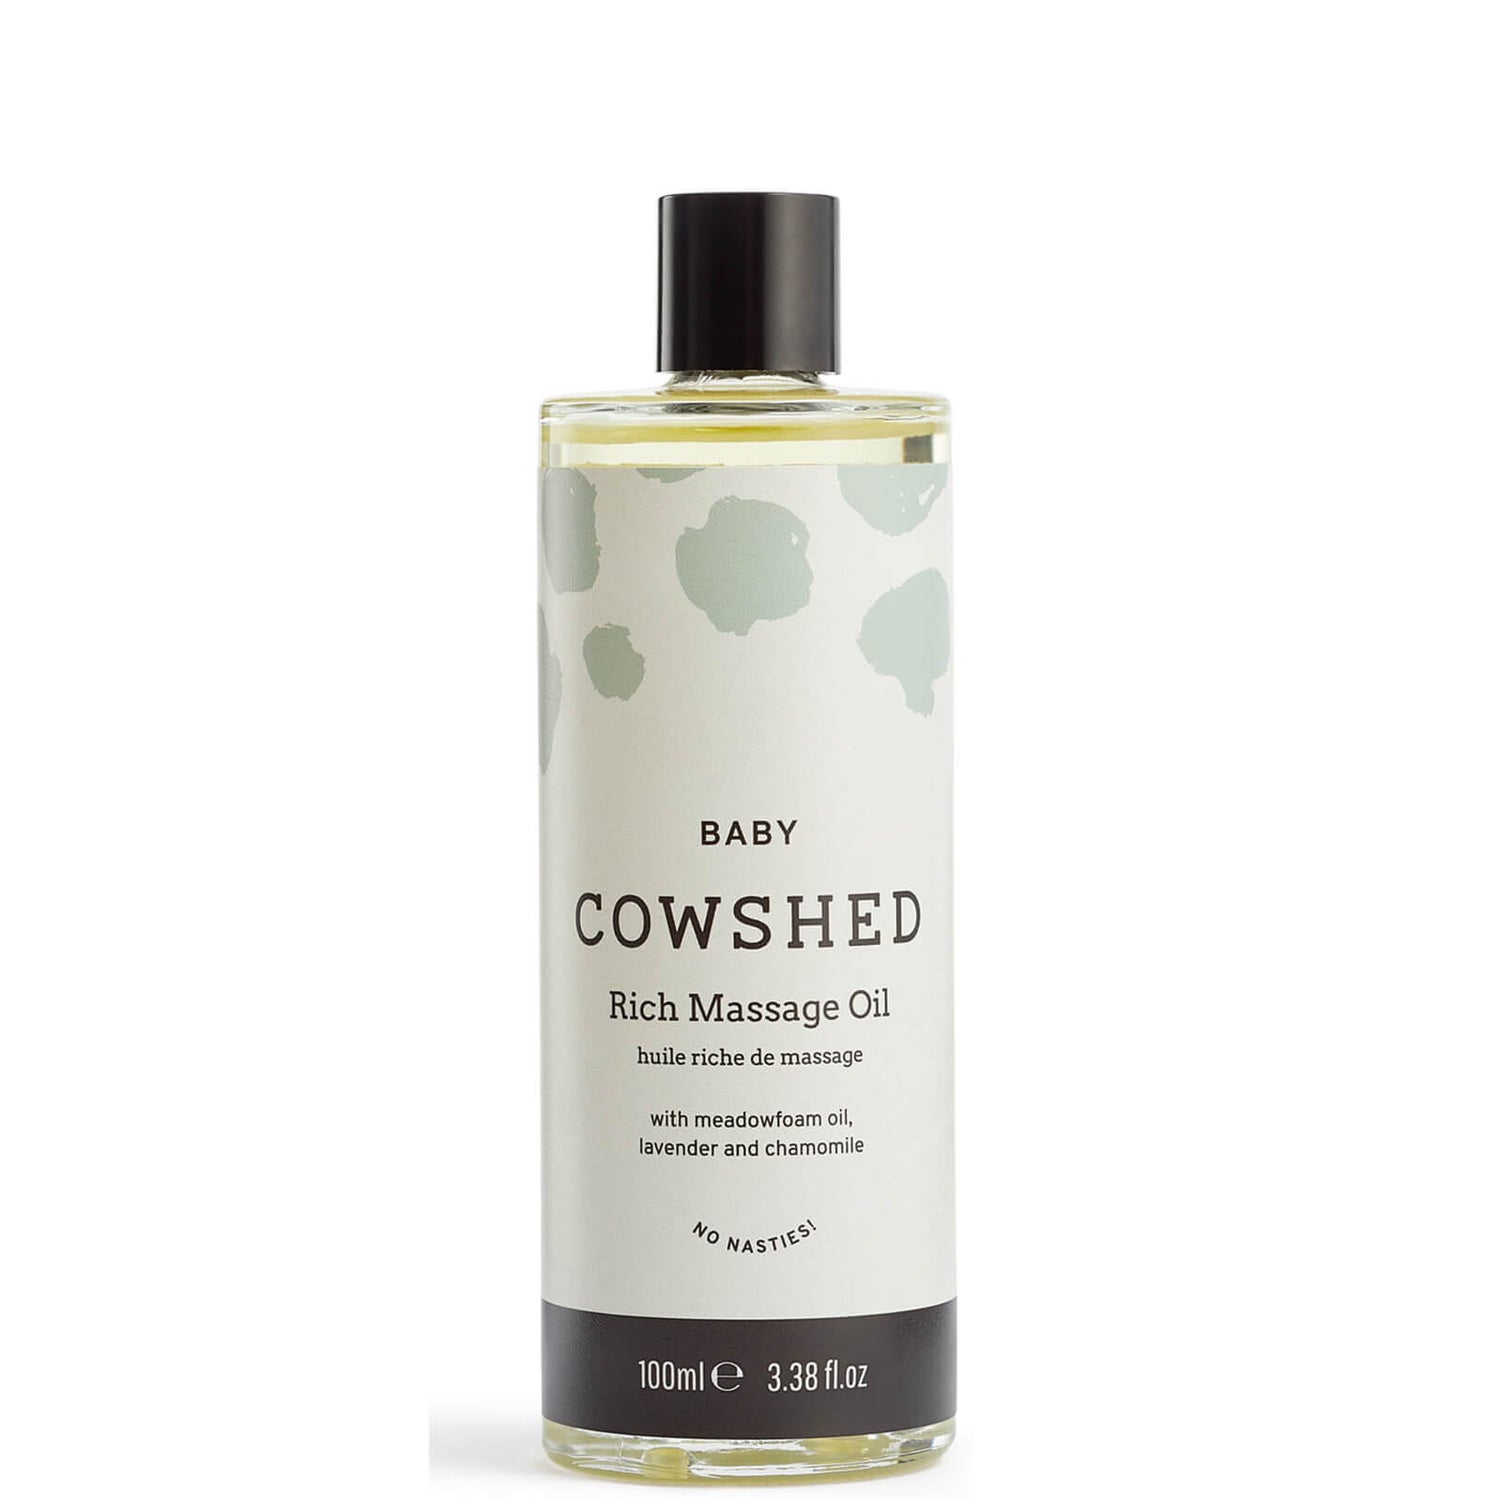 Cowshed 婴儿滋润按摩油 100ml